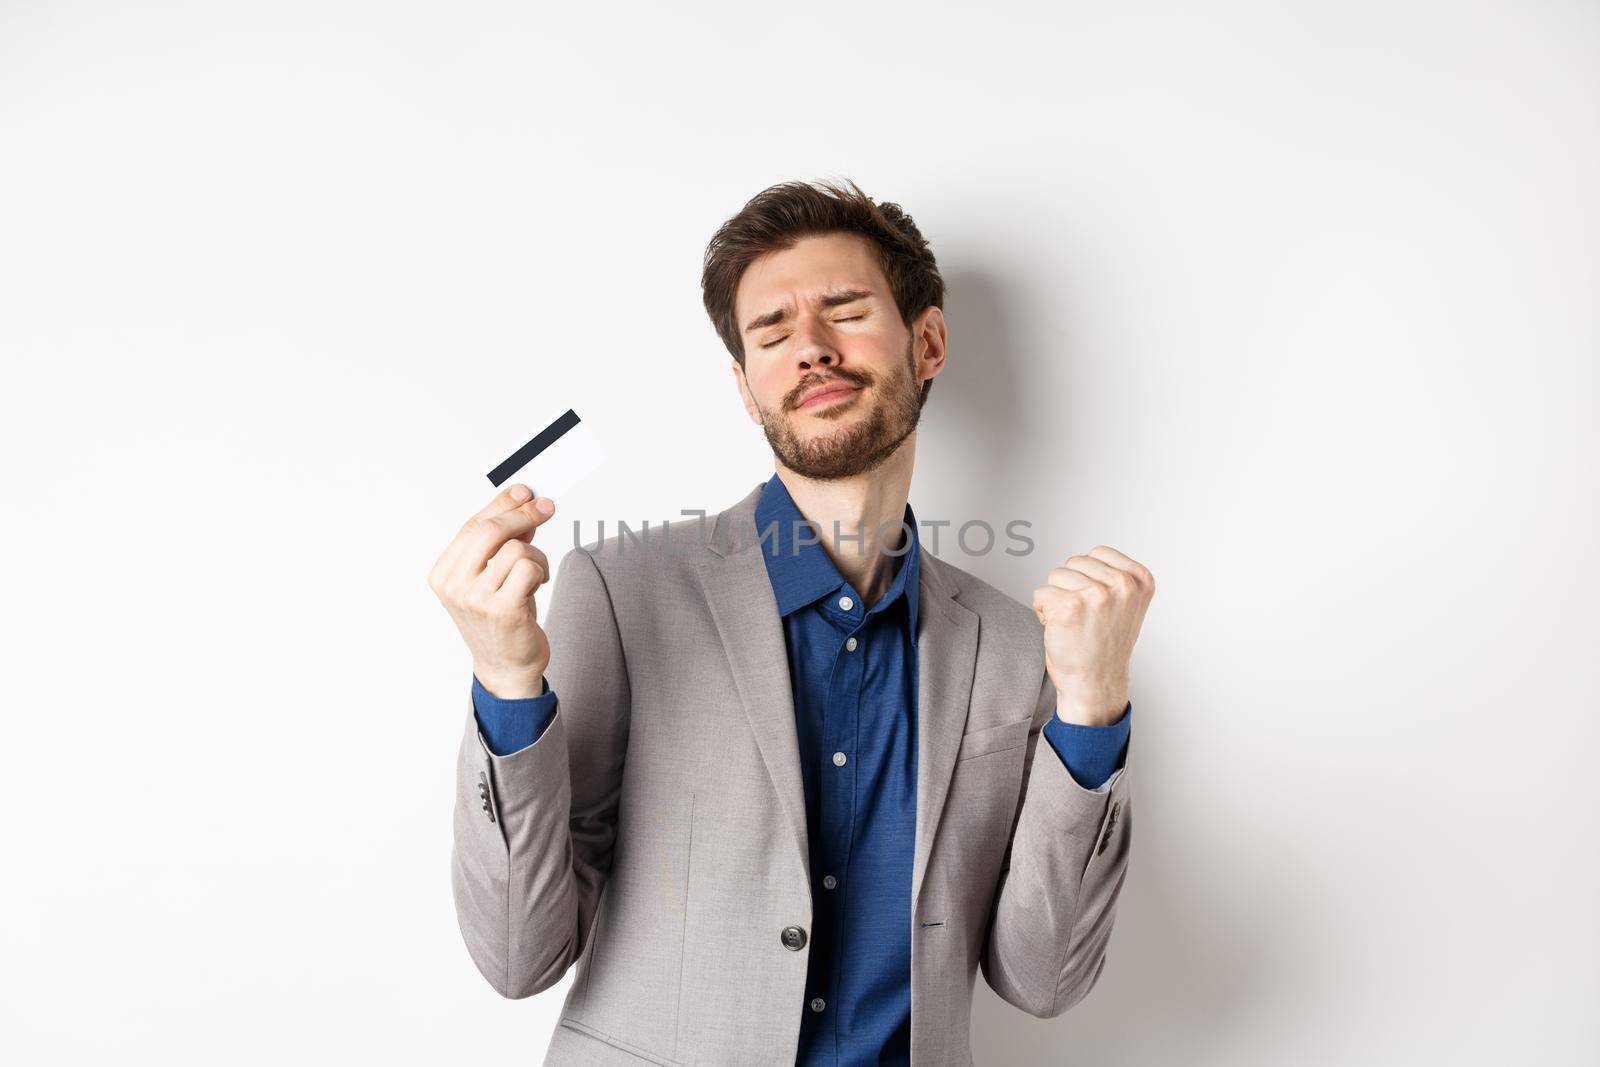 Excited successful businessman dancing with plastic credit card, raising fist pumps and smiling delighted, standing on white background in suit.